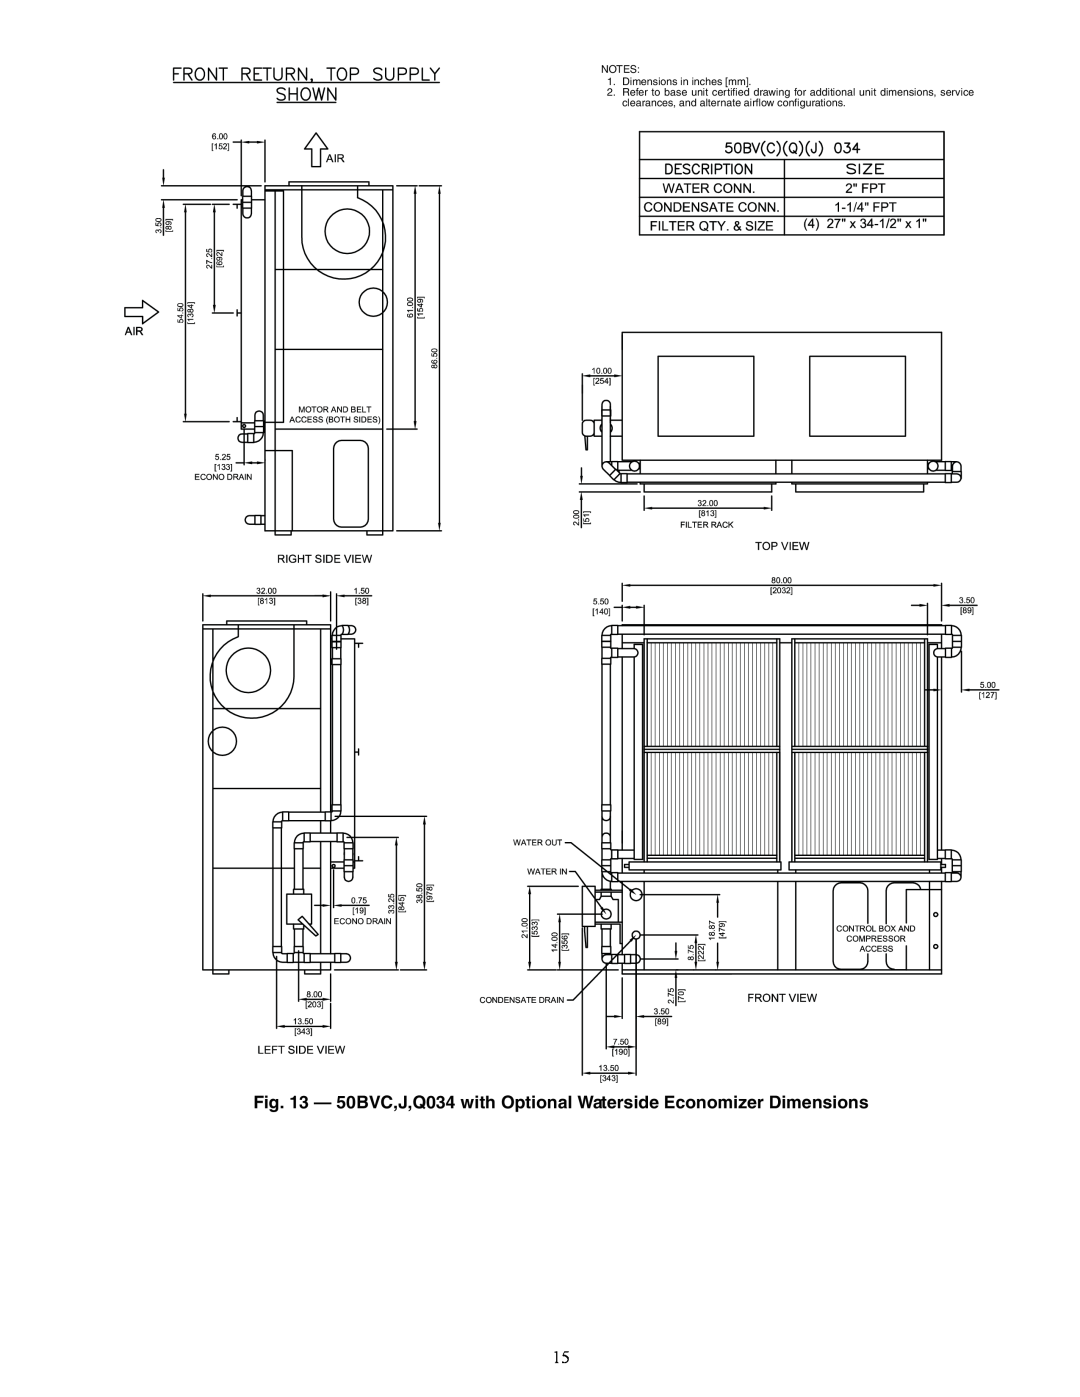 Carrier 50BV020-064 specifications a50-7307ef, NOTES 1.Dimensions in inches mm 